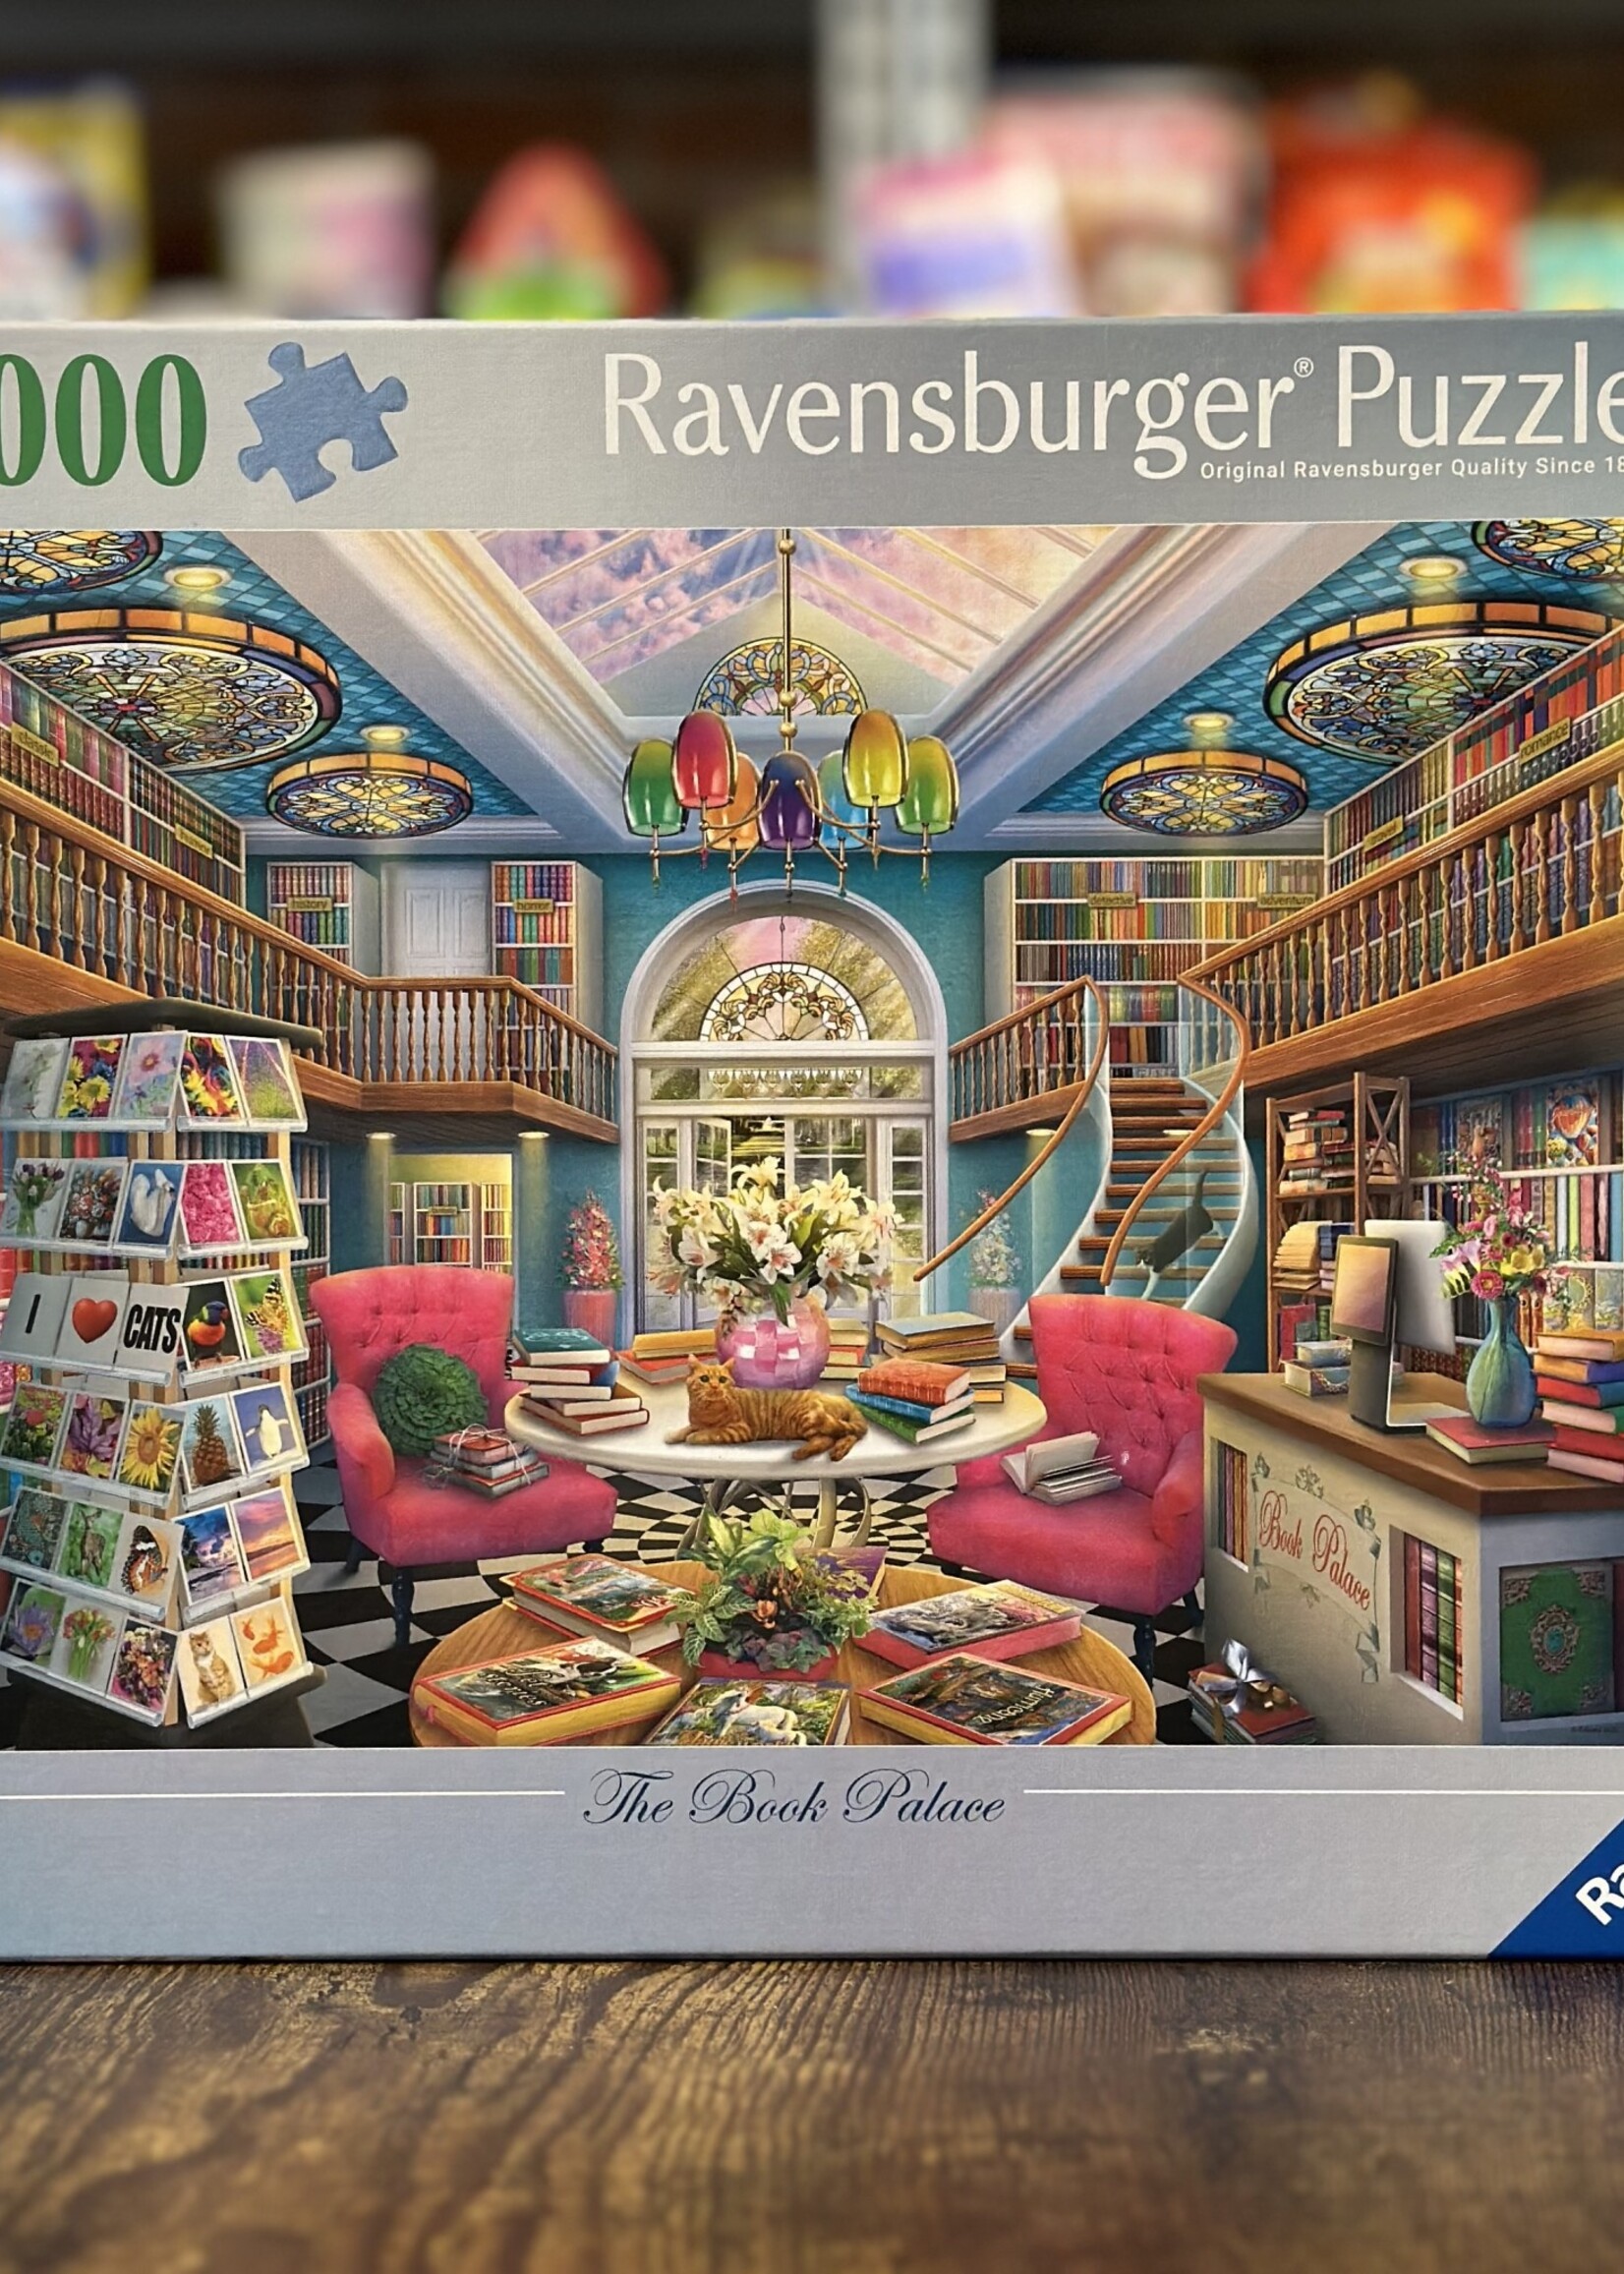 Ravensburger Puzzle - The Book Palace 1000 Pc.